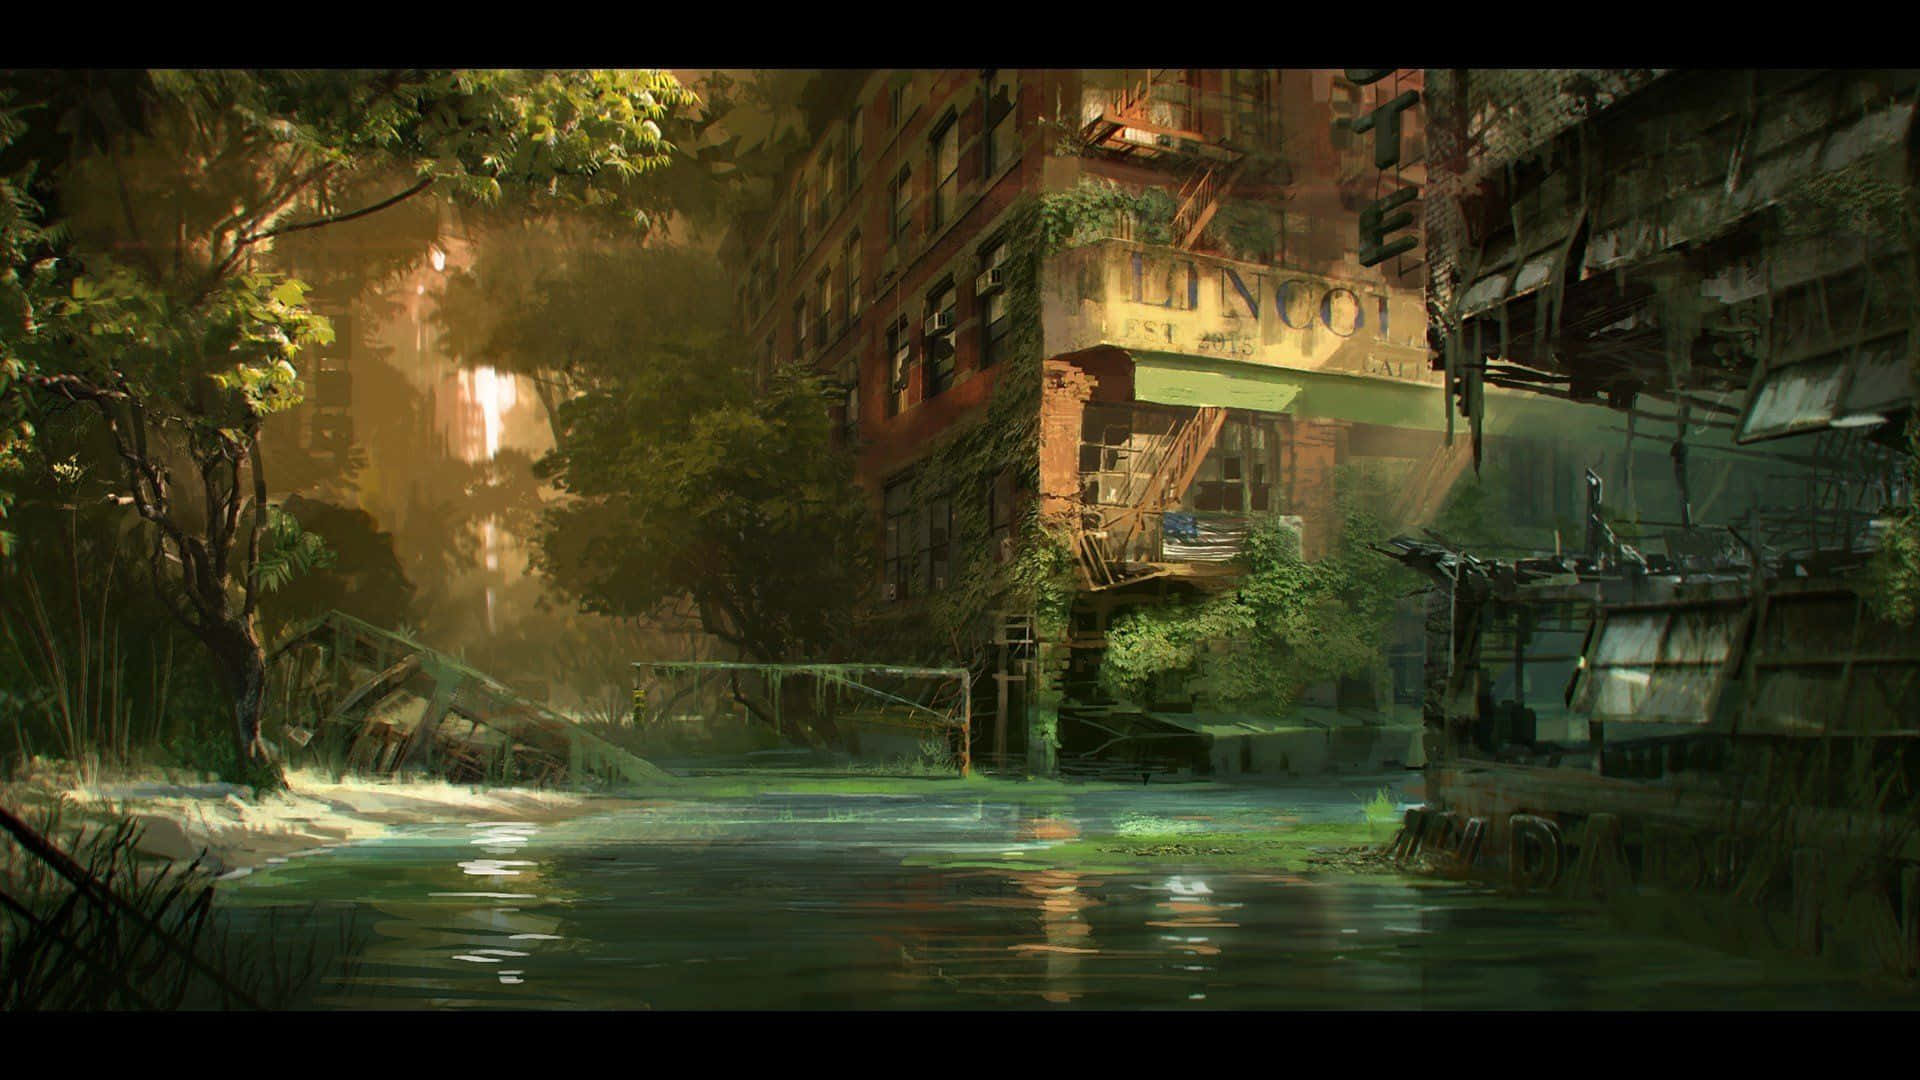 Explore the post-apocalyptic vision of a future New York City in Crysis 3 Wallpaper